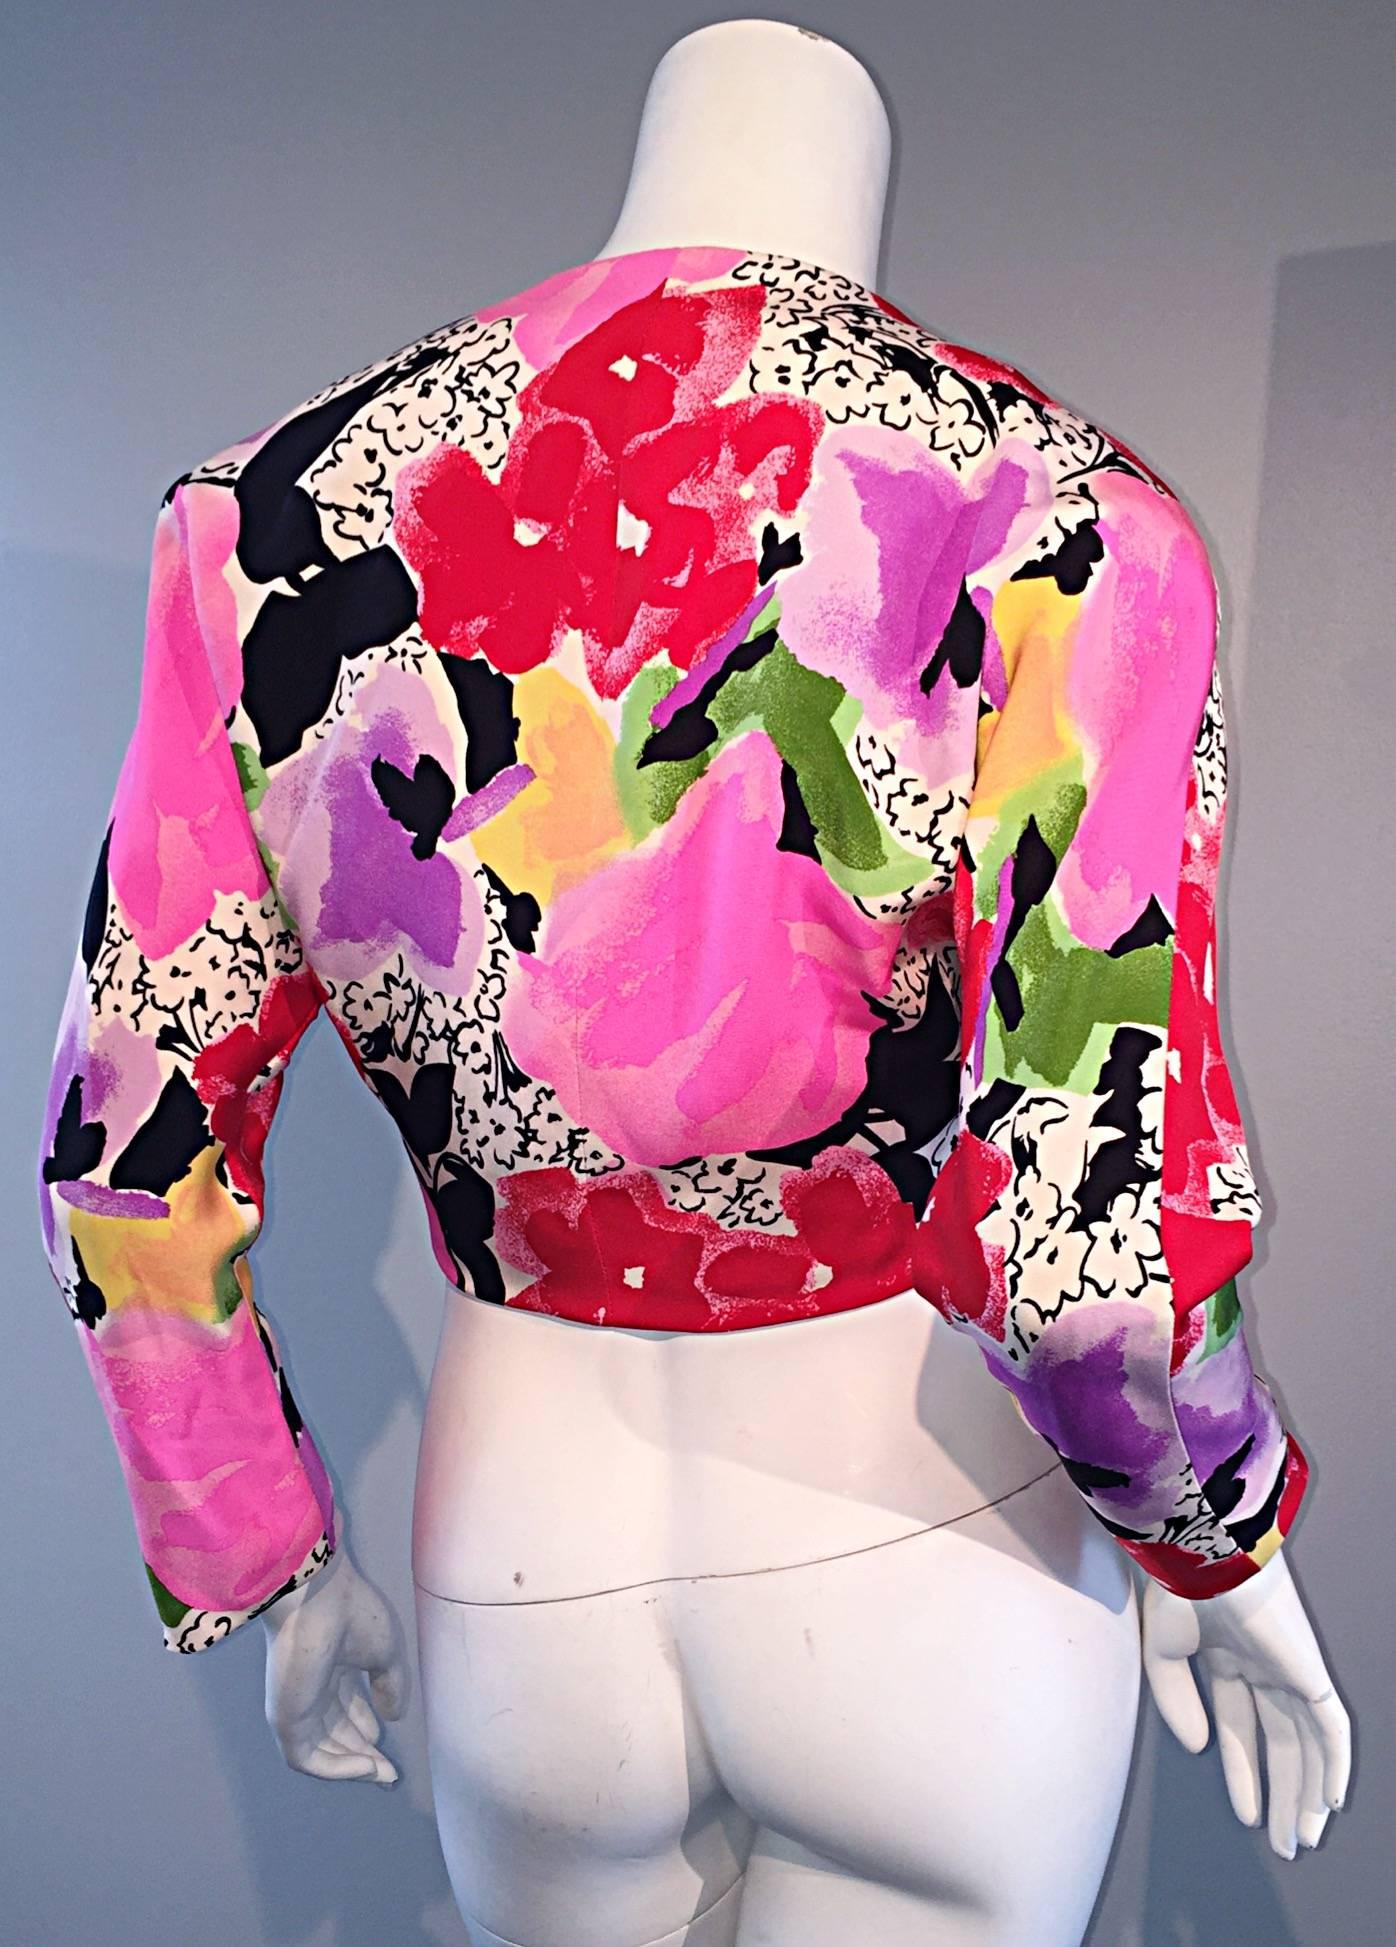 Rare Vintage Pierre Cardin Haute Couture SS1989 Floral Cropped Bolero Shrug

Rare vintage PIERRE CARDIN Haute Couture cropped bolero/shrug jersey jacket top! Bold, vibrant floral print throughout. Completely hand-sewn, numbered, and marked